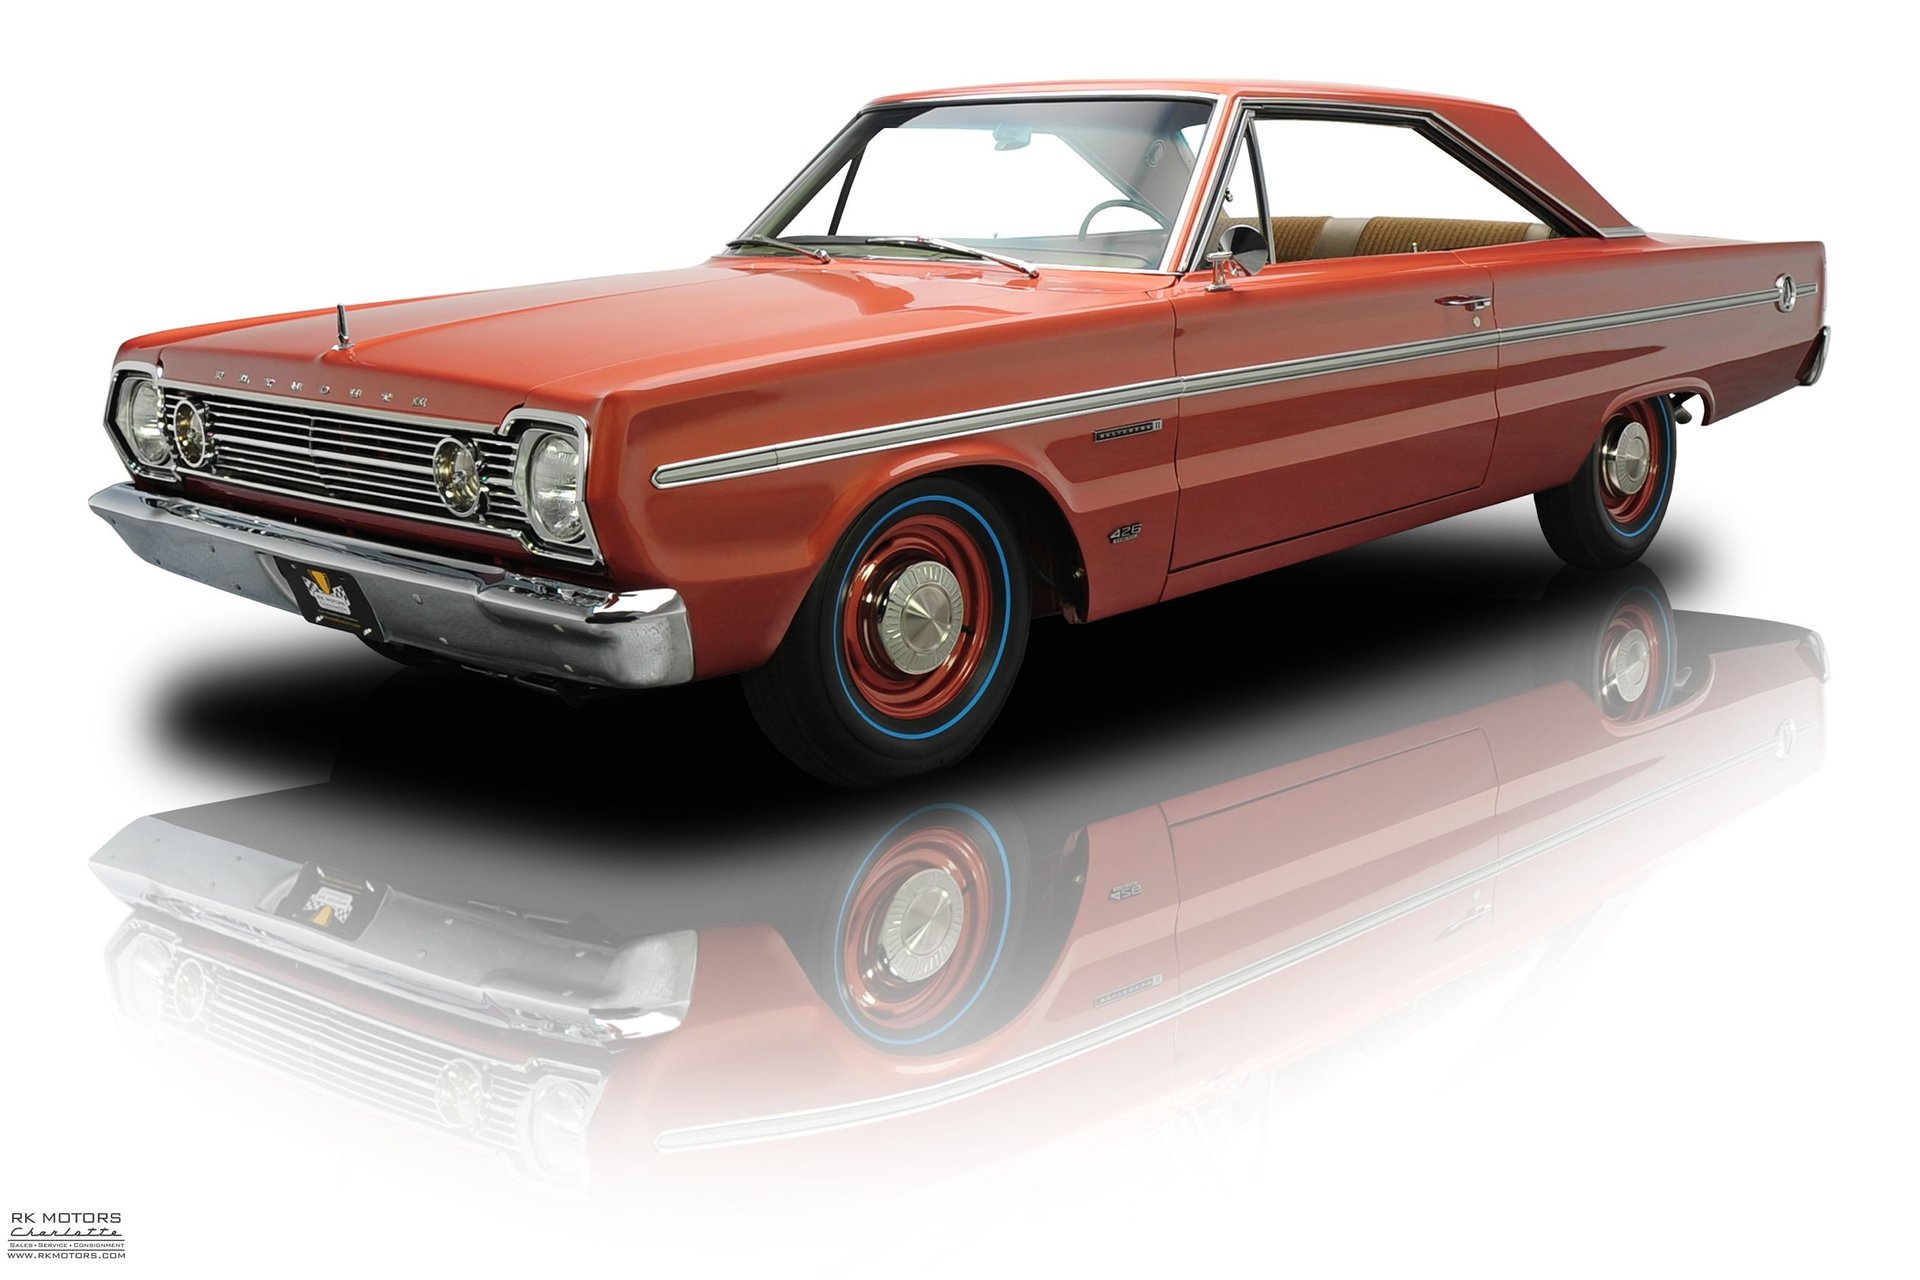 132873 1966 Plymouth Belvedere RK Motors Classic Cars and Muscle